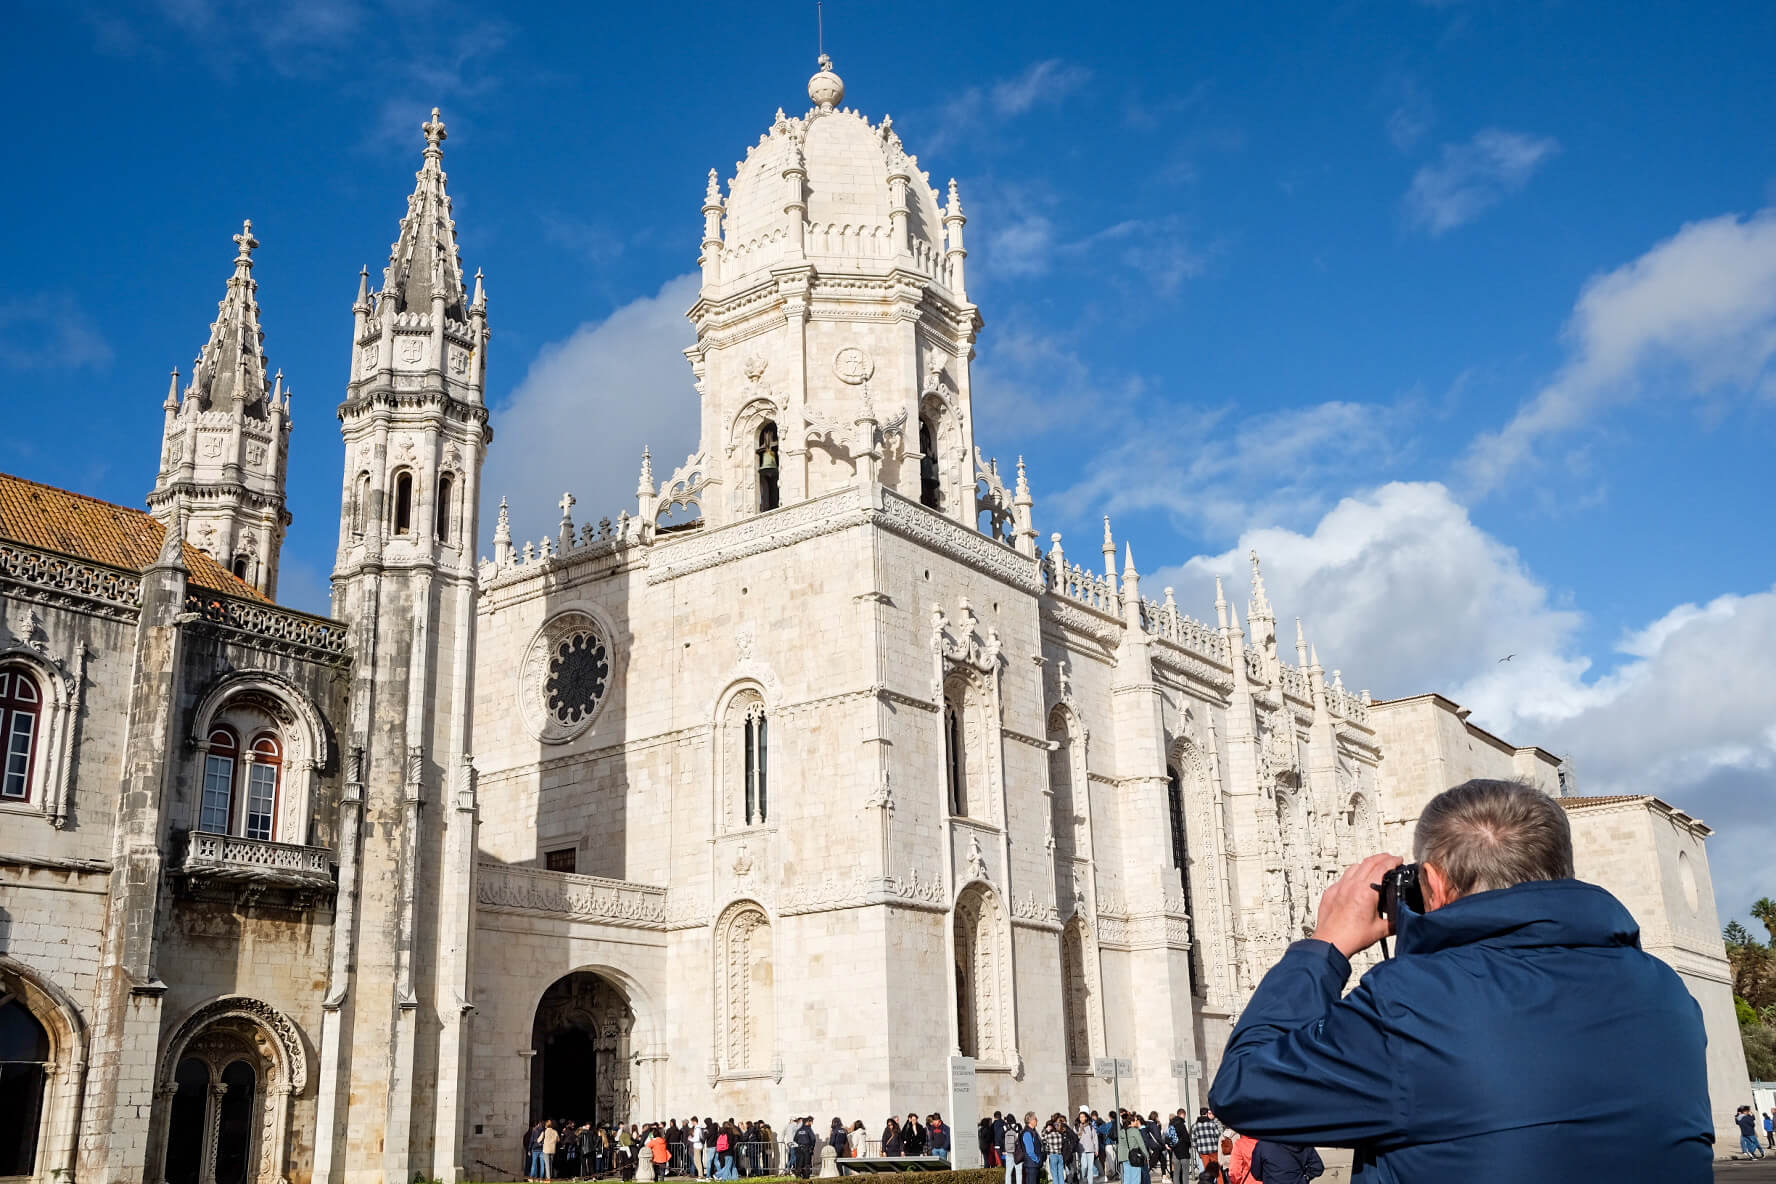 tourist with a camera takes a photo of the mosteiro dos jerónimos in belém, lisbon, portugal